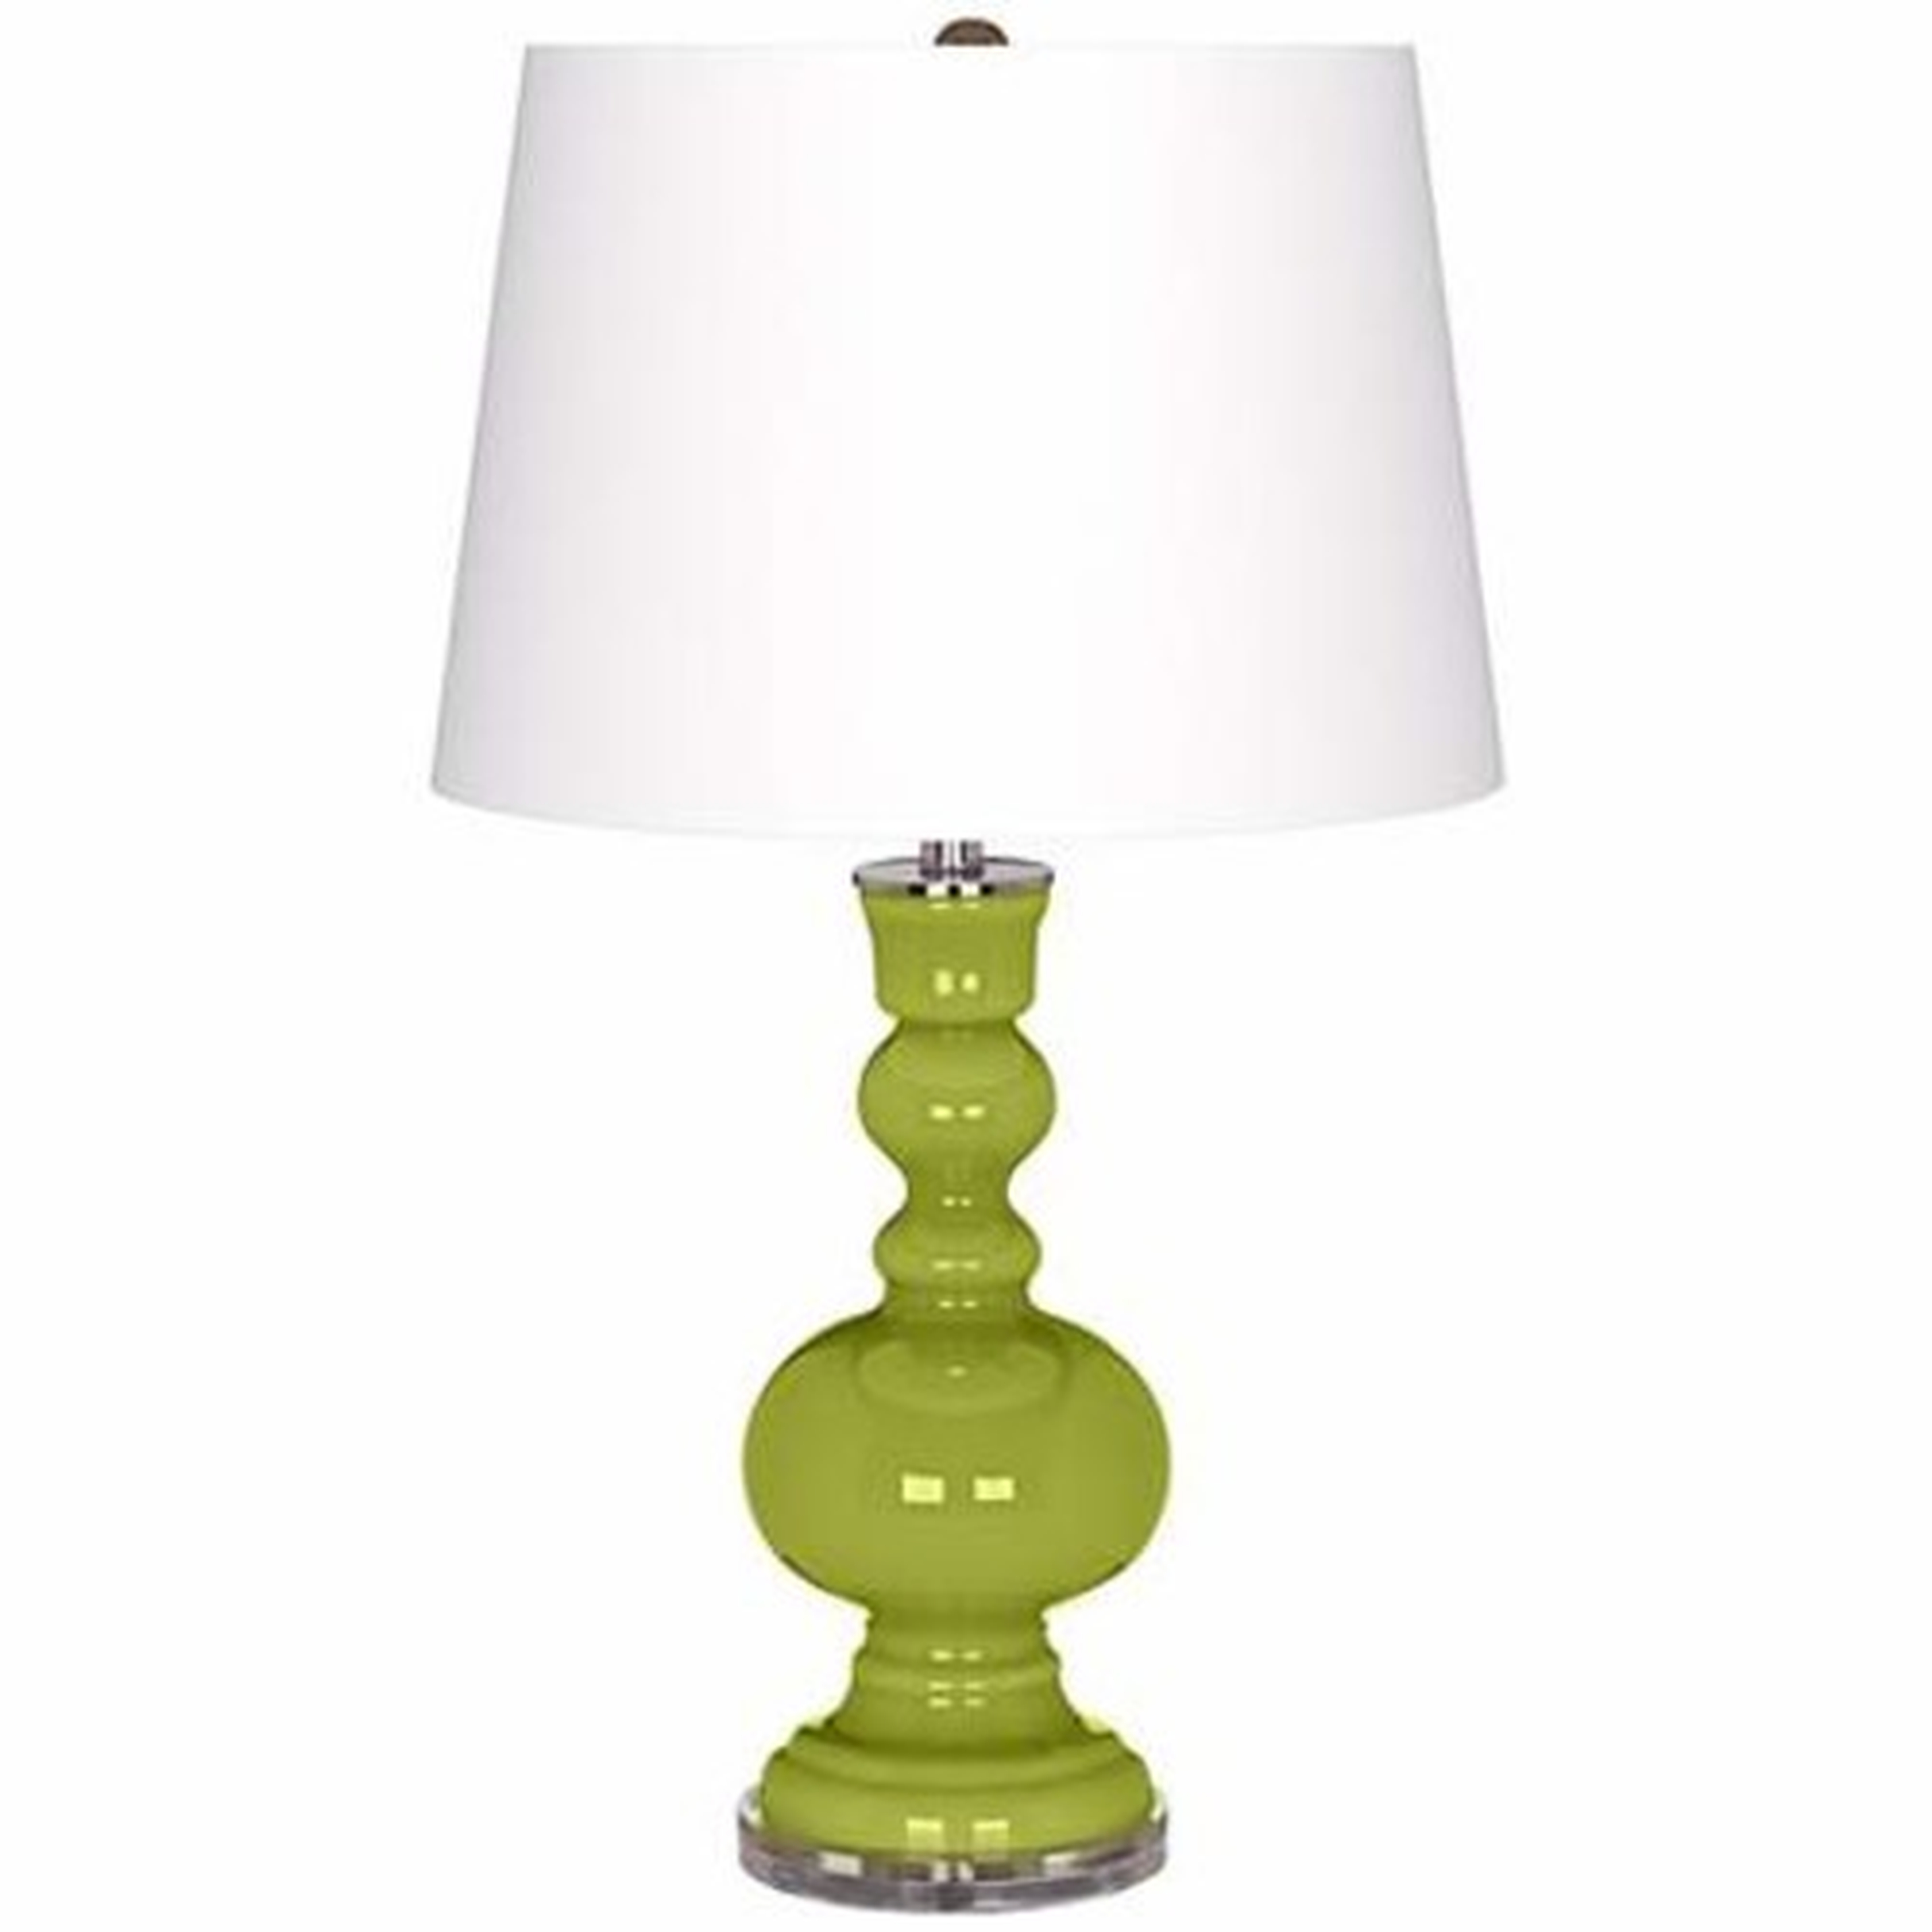 Parakeet Apothecary Table Lamp - Lamps Plus